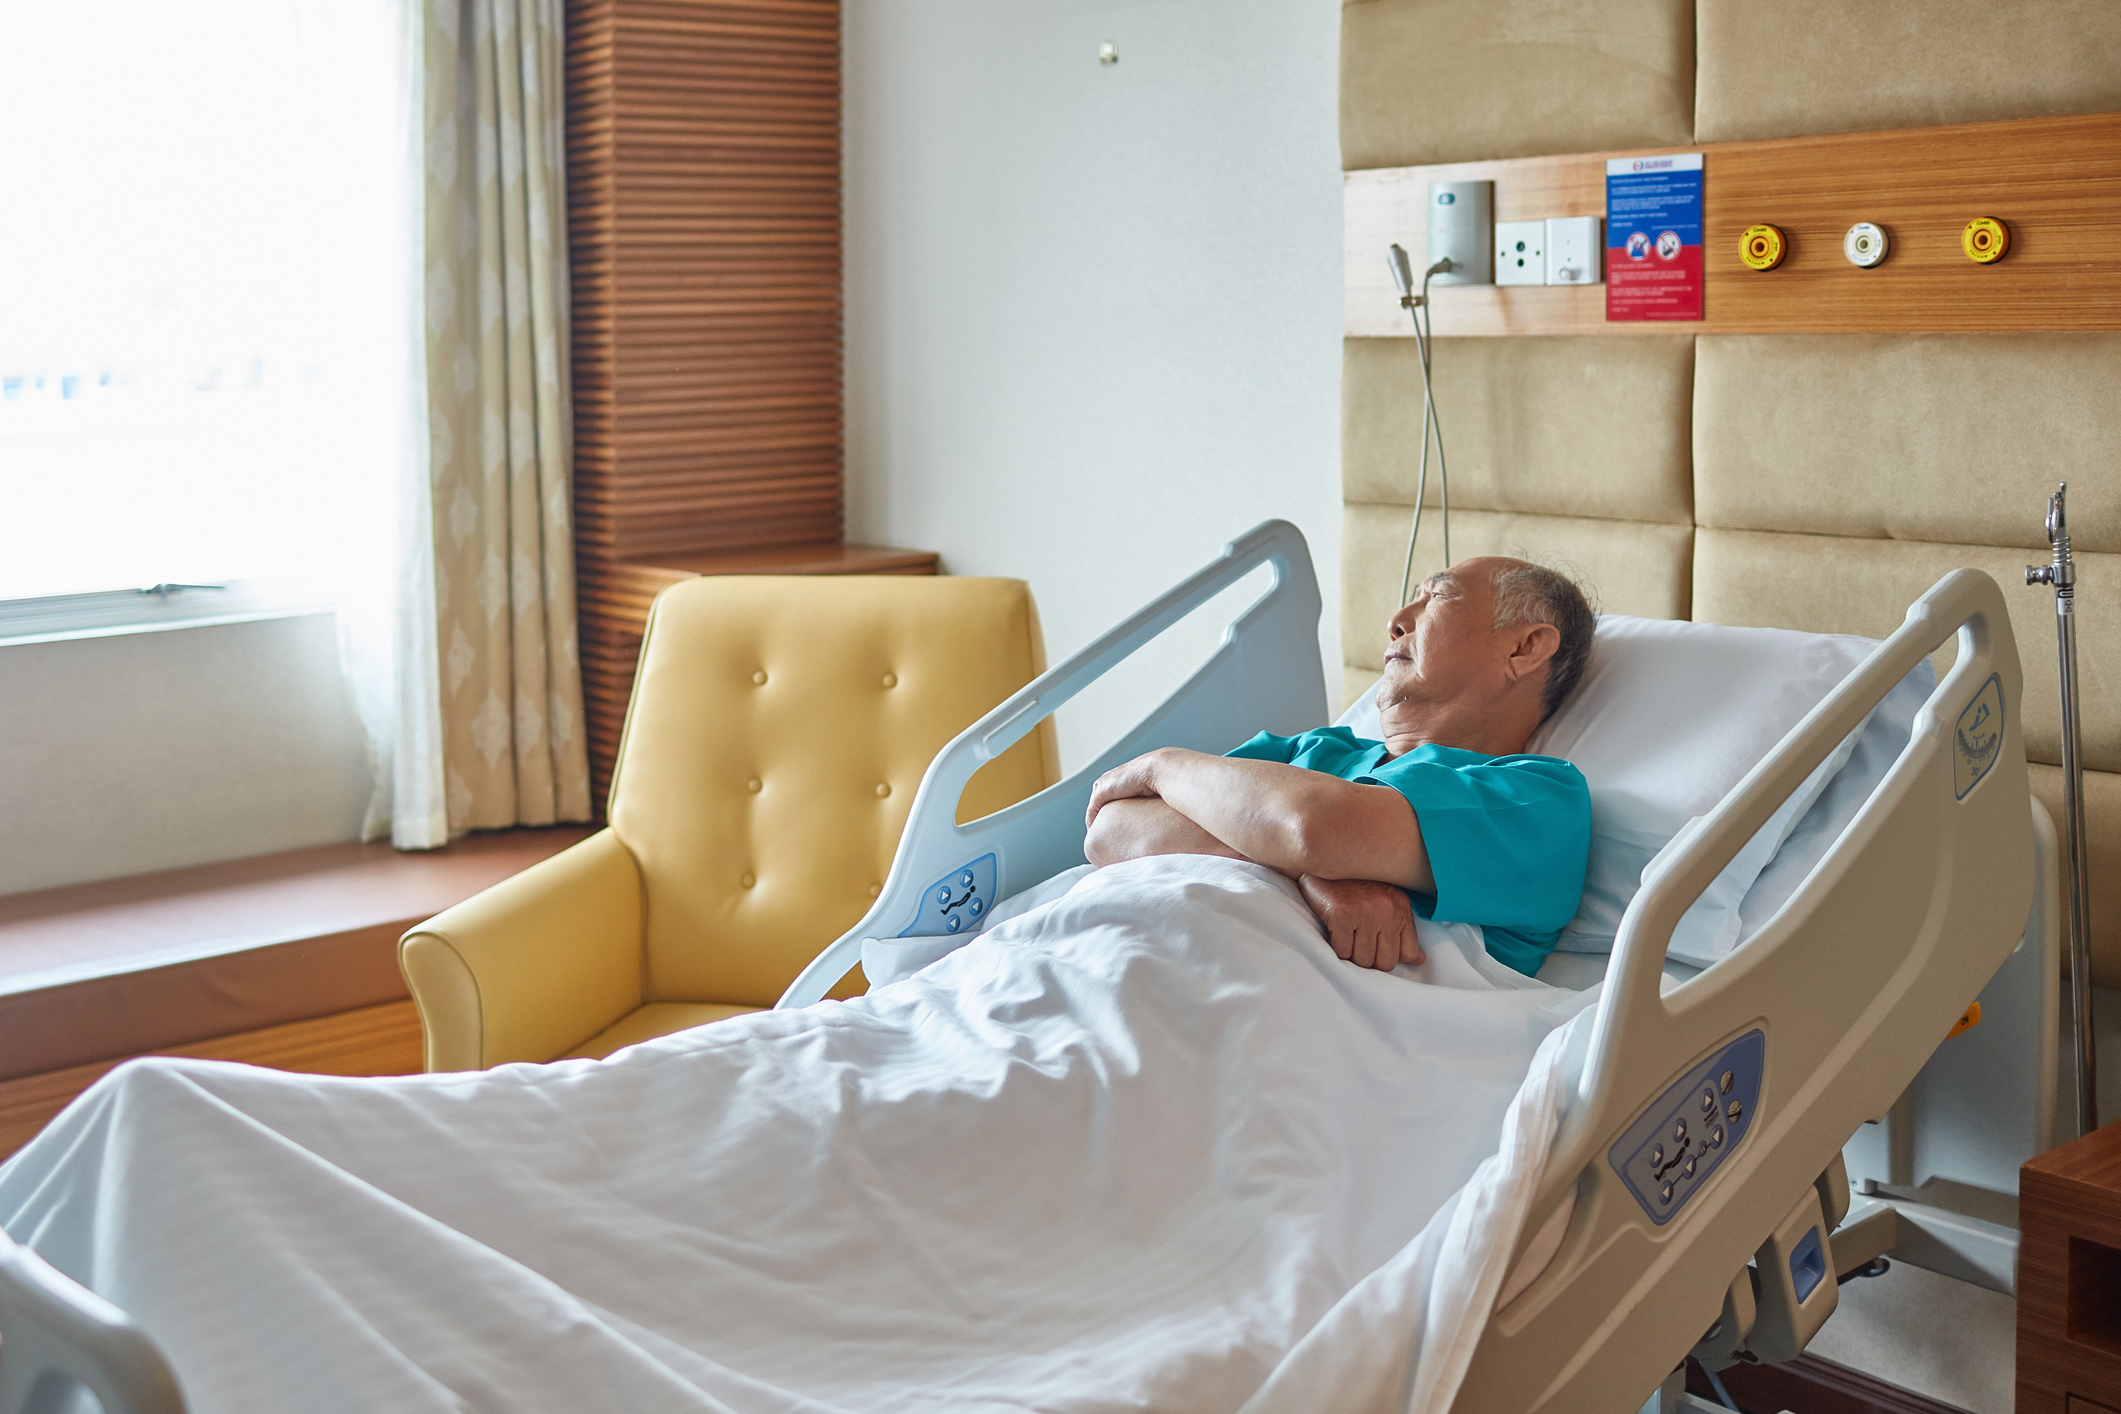 A new approach is being developed to treating delirium in seniors during hospitalization.